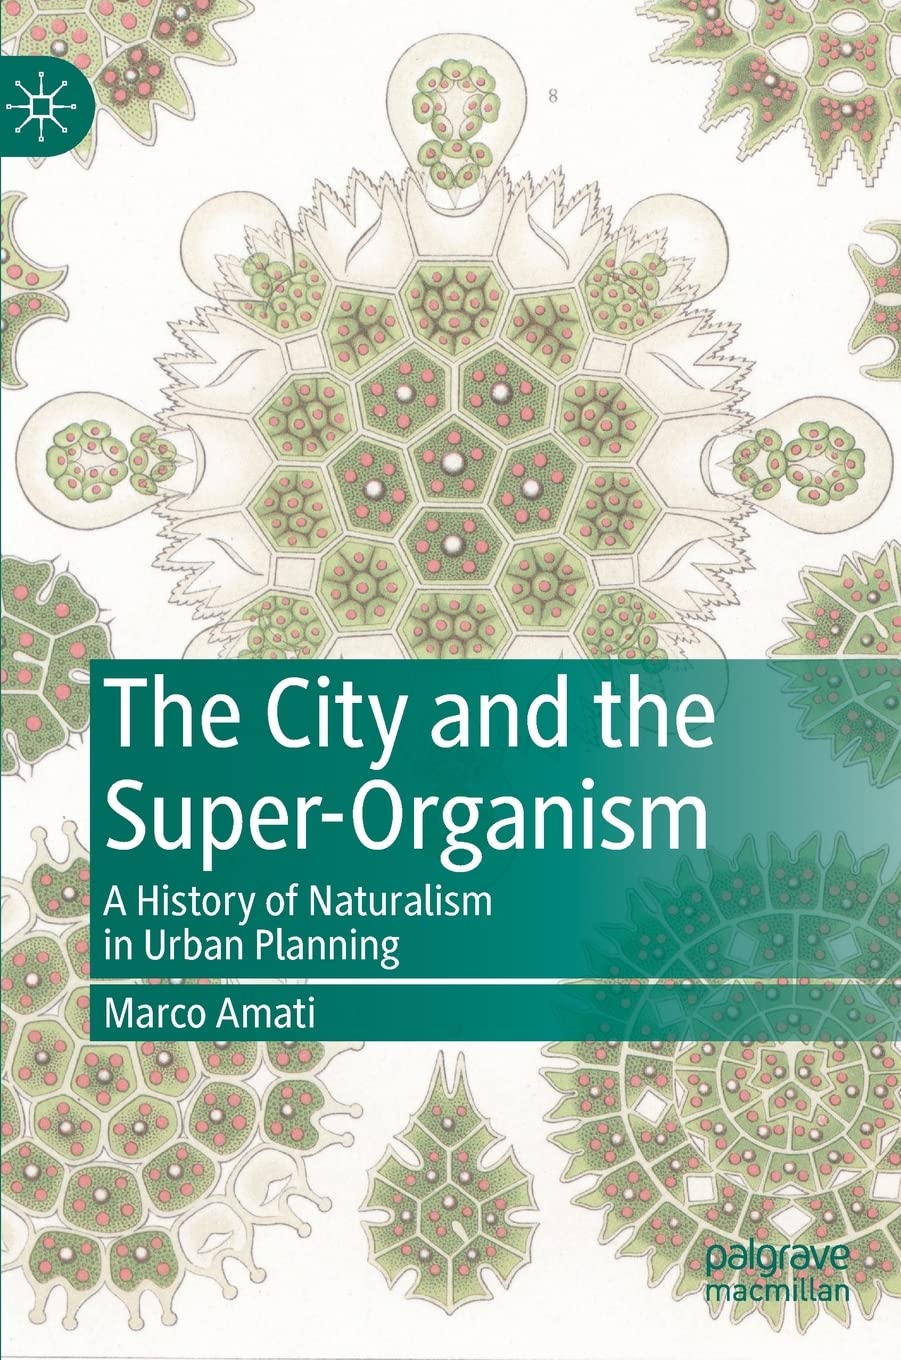 The City and the Super-Organism book cover